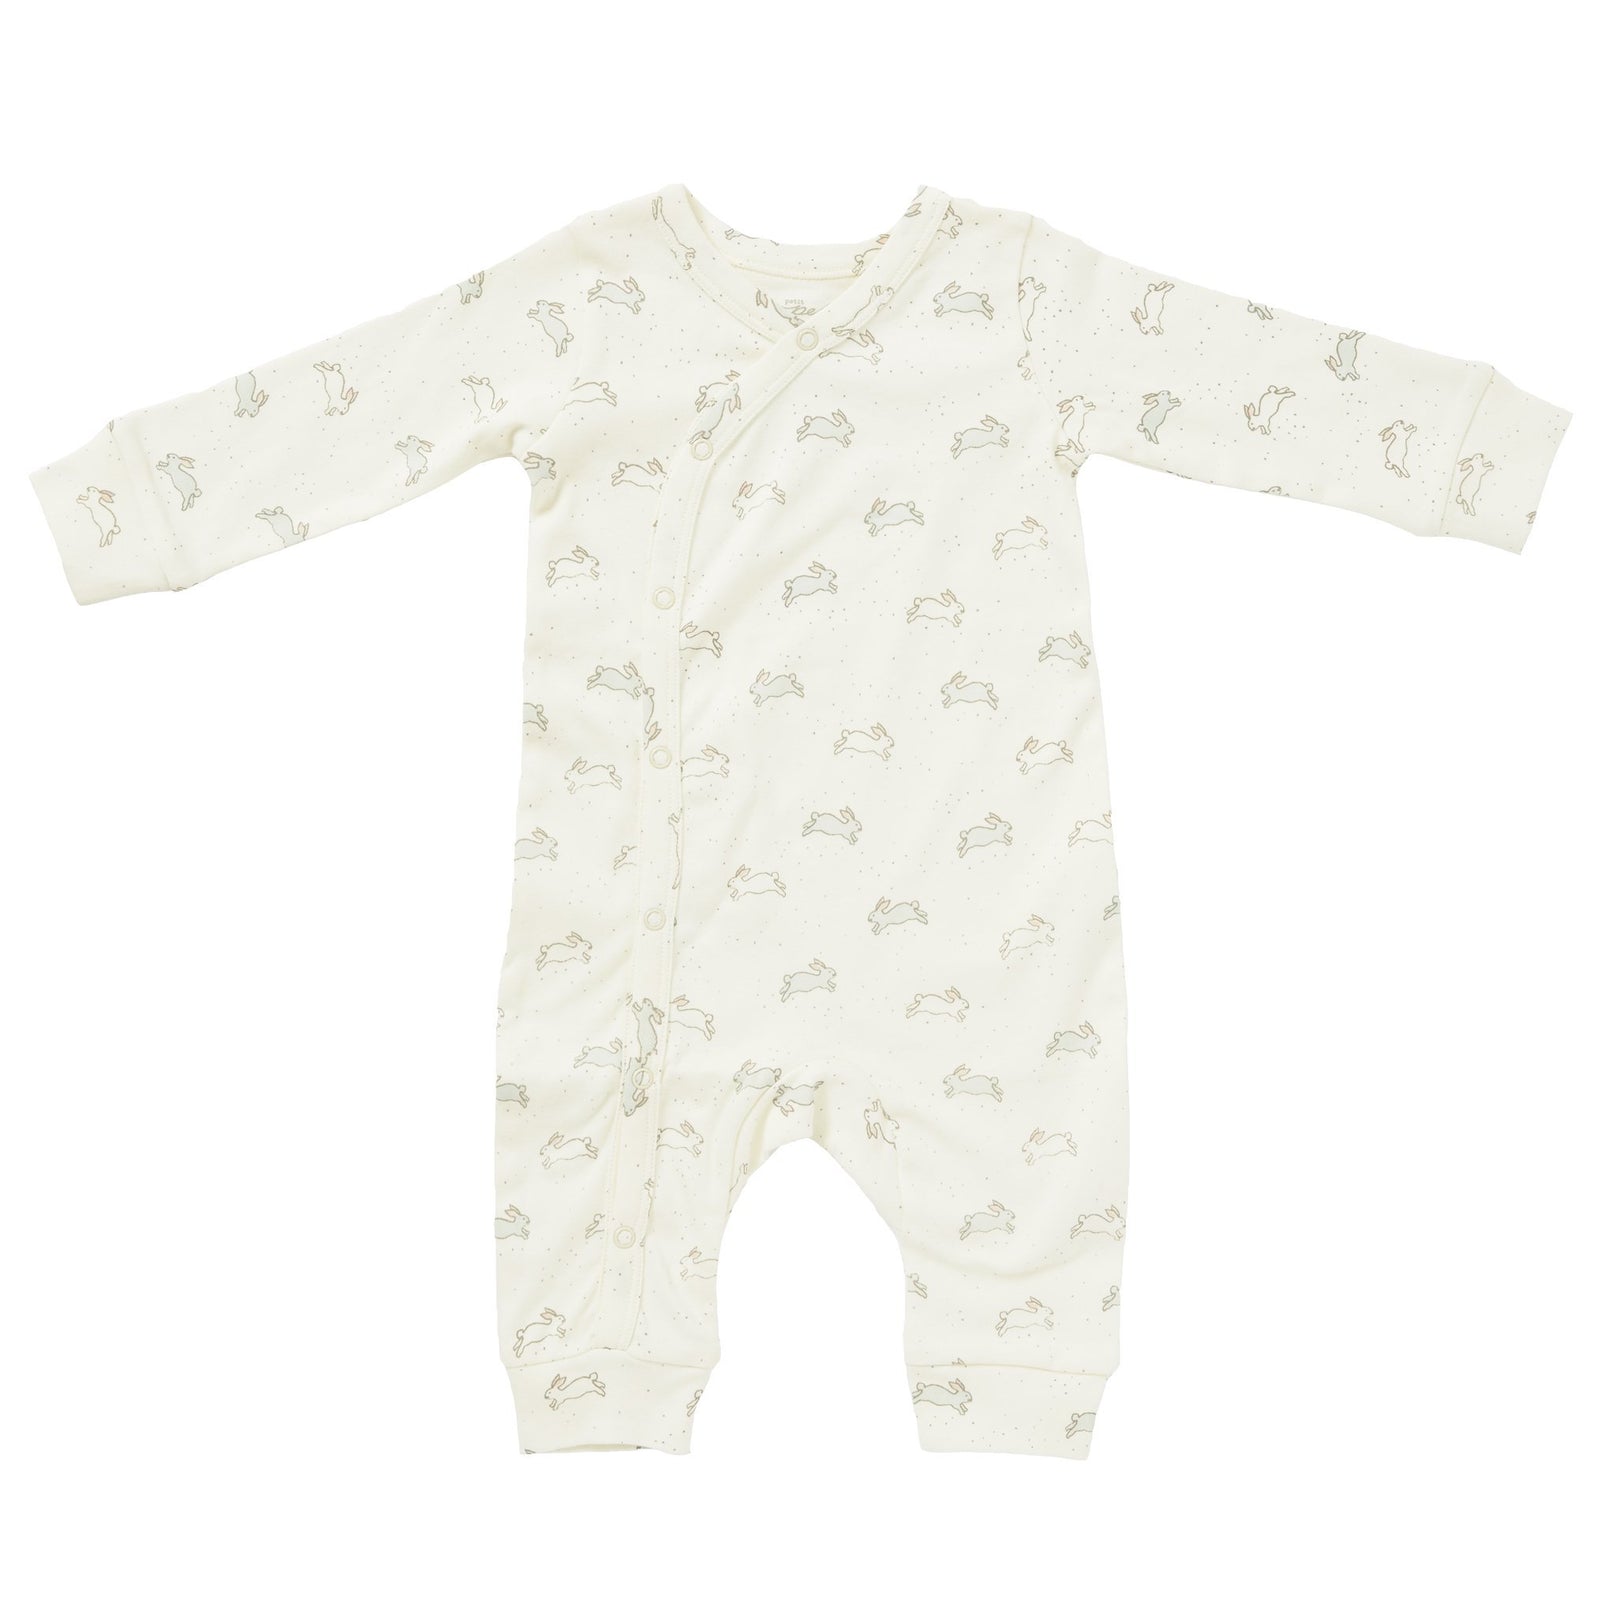 Pehr Long Sleeve  Tiny Bunny Romper. Certified organic cotton. White with bunnies.